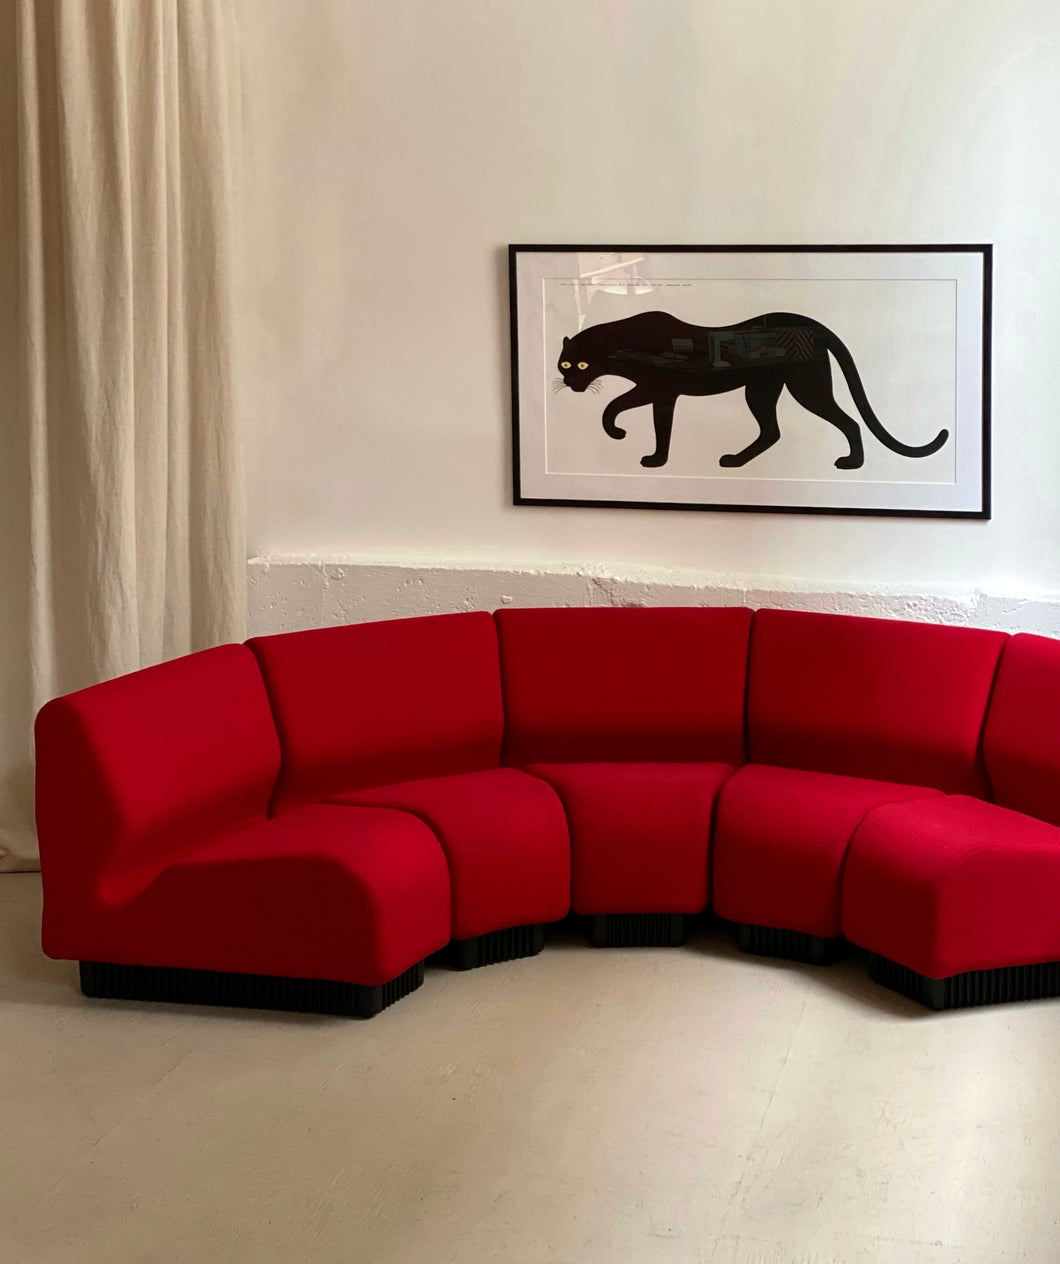 Modular sectional sofa by Don Chadwick for Herman Miller